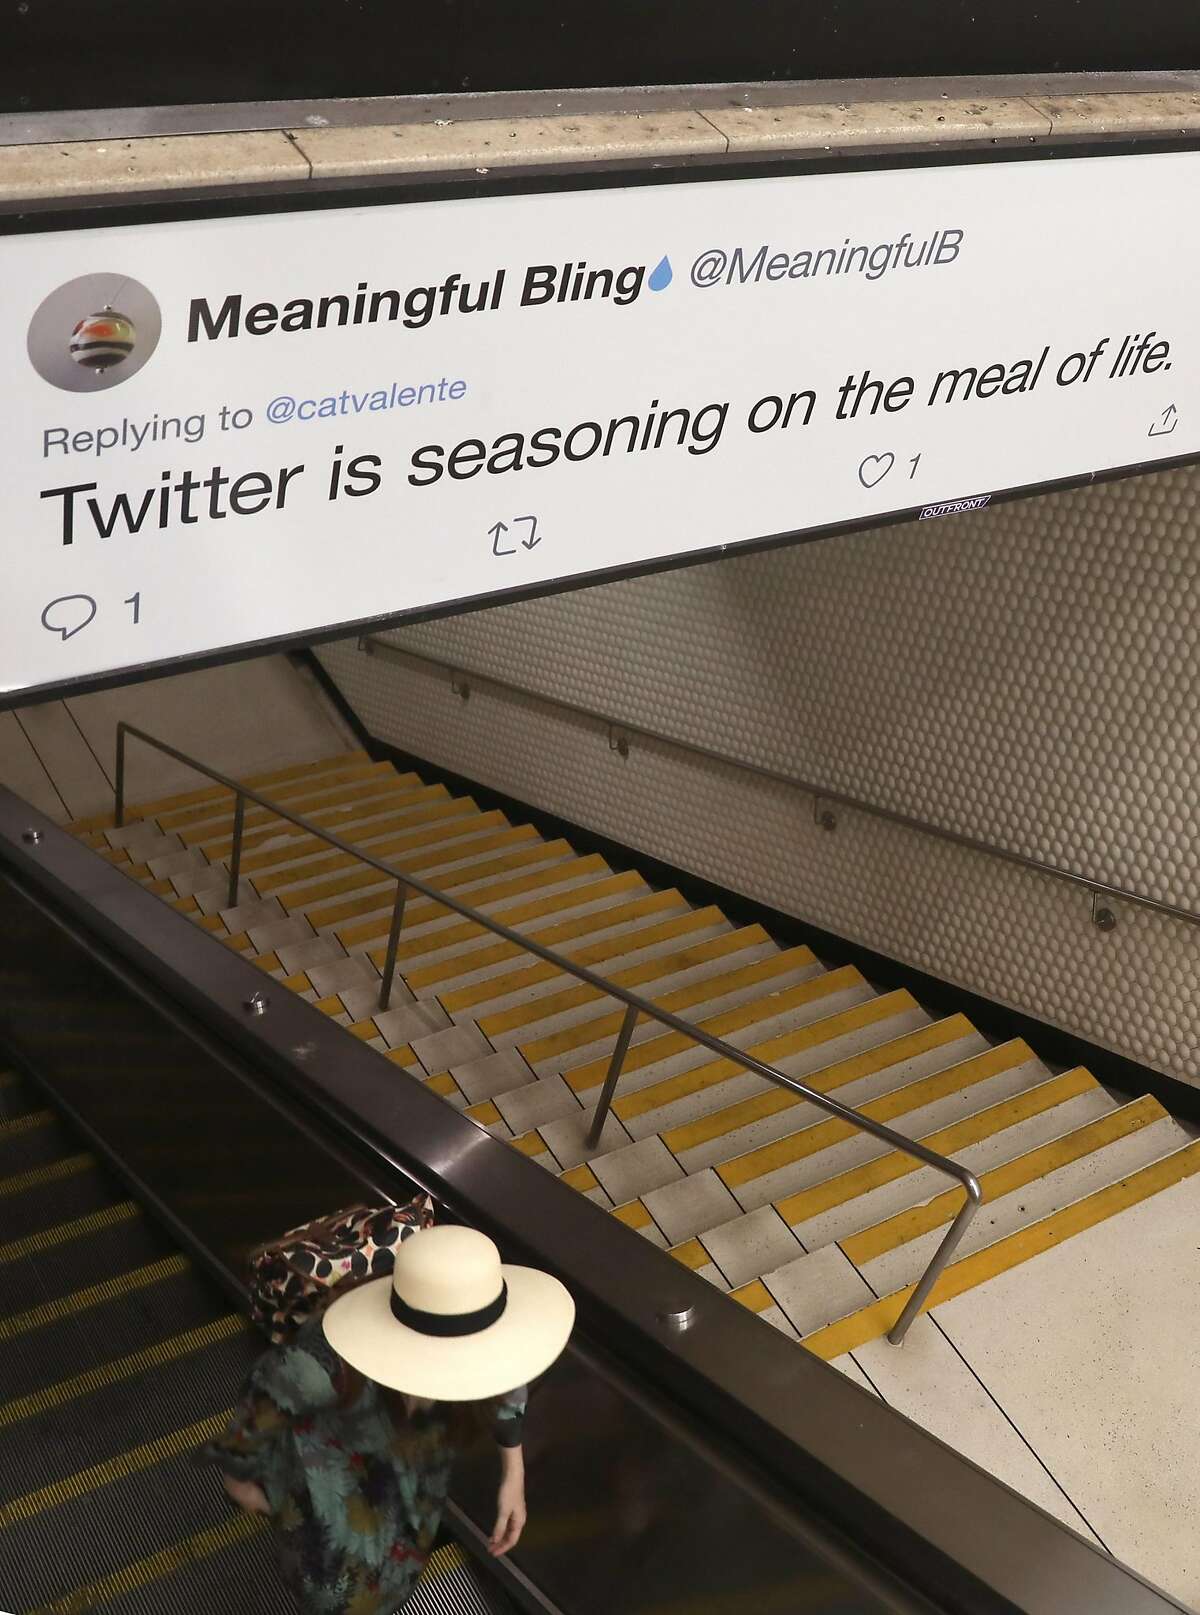 Tweets are displayed on Tweeter billboard ads inside Powell Street station on Thursday, Sept. 12, 2019 in San Francisco, Calif.